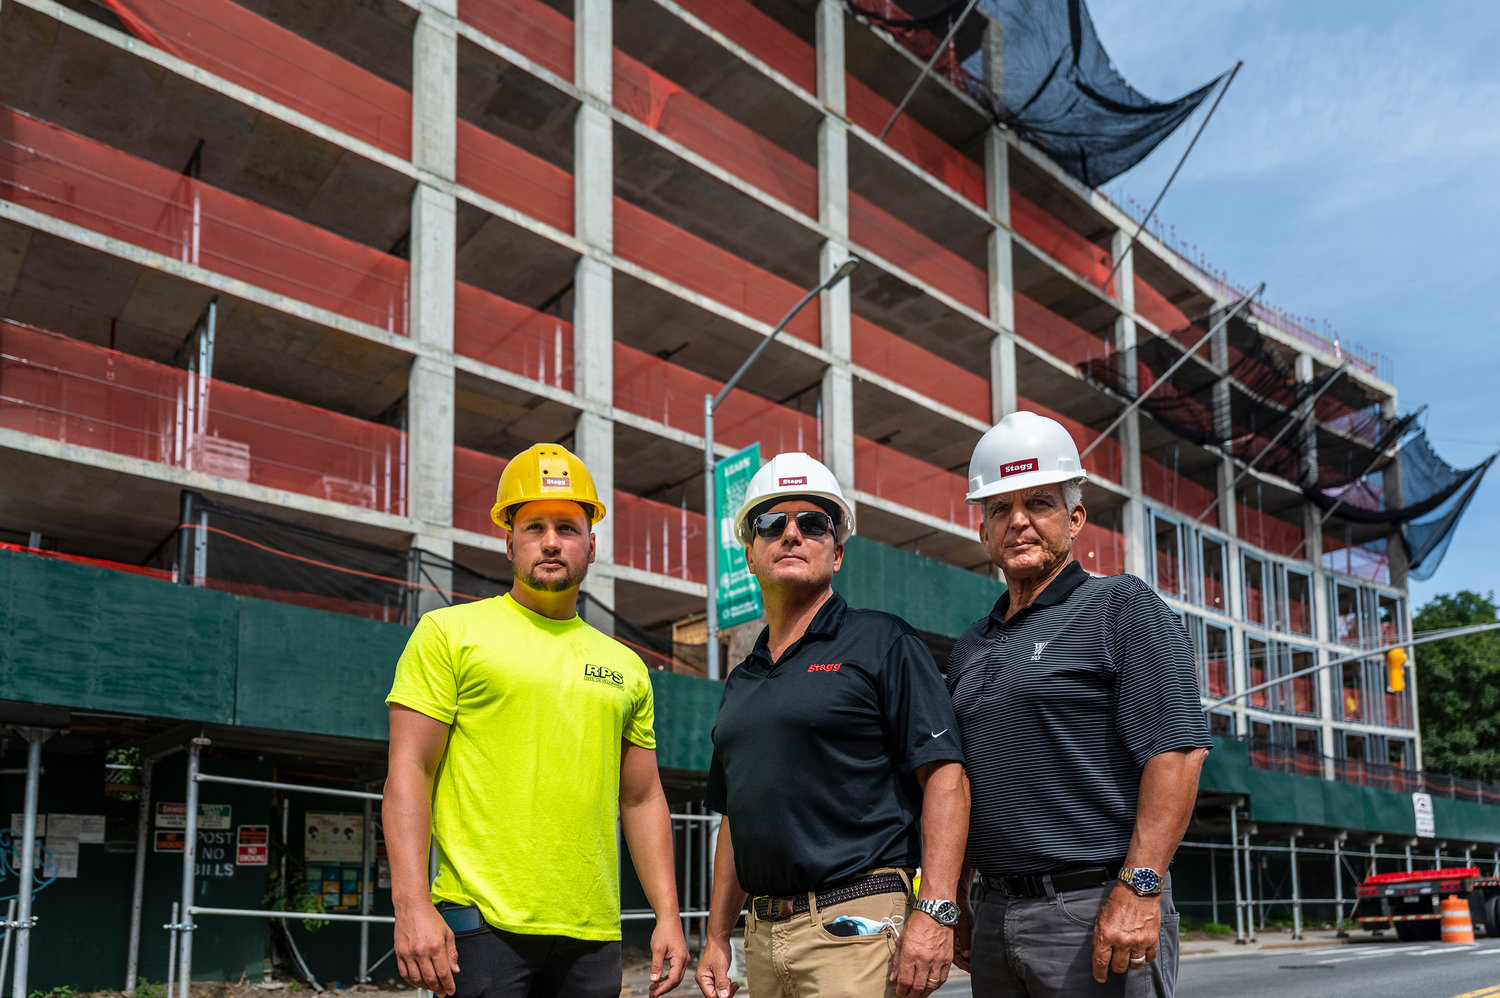 Ryan Stagg, left, joins Mark Stagg and Jay Martino from the balcony of their 5278 Post Road apartment construction project last year. The Stagg Group has been one of the most active developers in this part of the Bronx for the last decade, known for rescuing other development projects that just never came together. The group is poised to do that yet again — this time at 3745 Riverdale Ave. — which they hope to build an apartment complex where Montefiore Medical Center once planned to build medical offices.